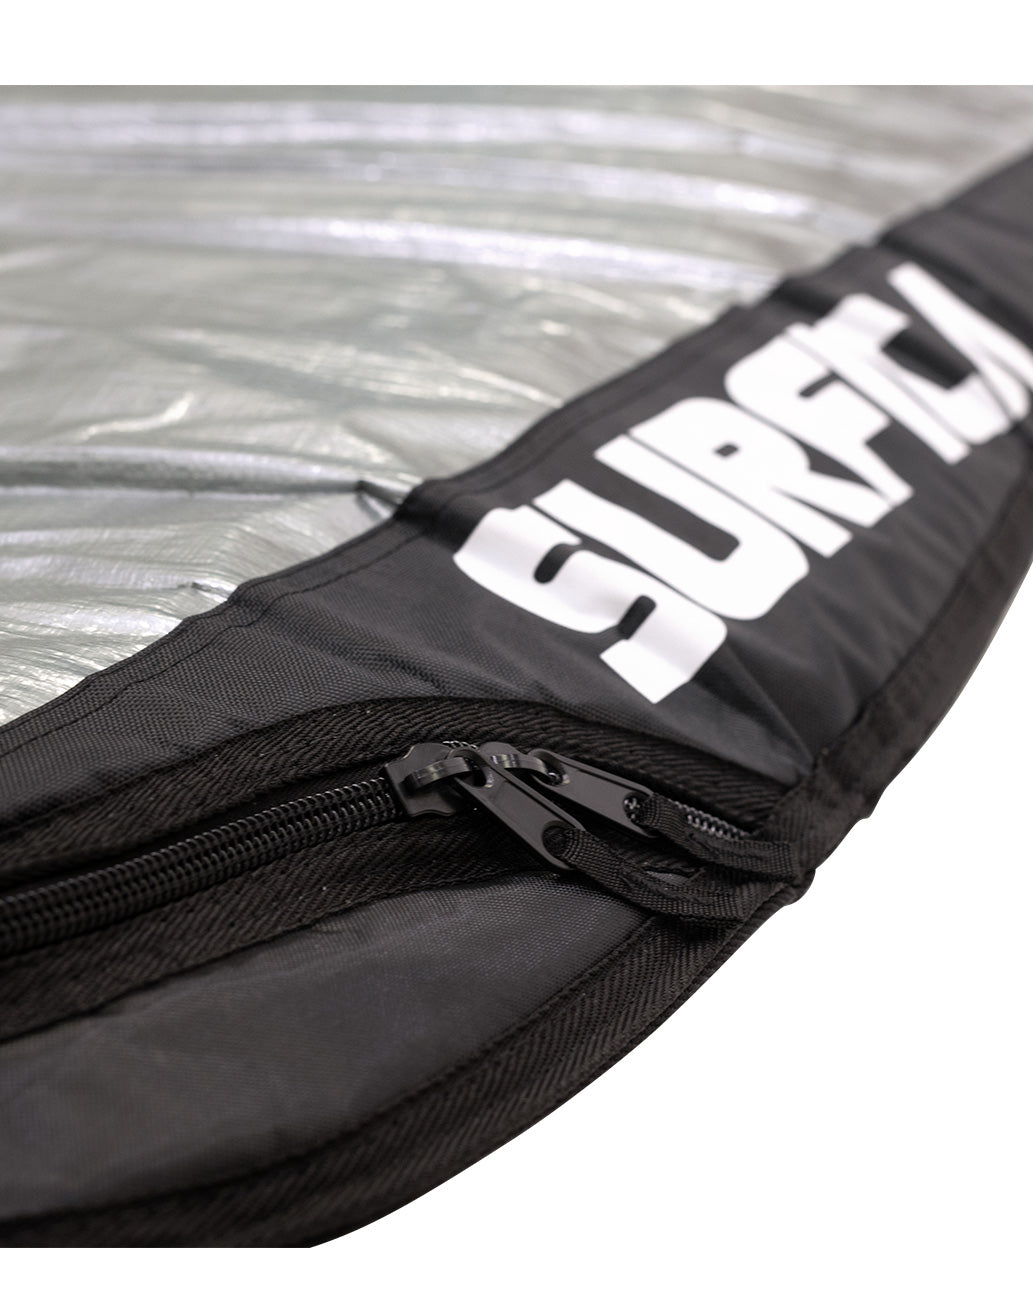 Surfica All Rounder SUP Board Bag